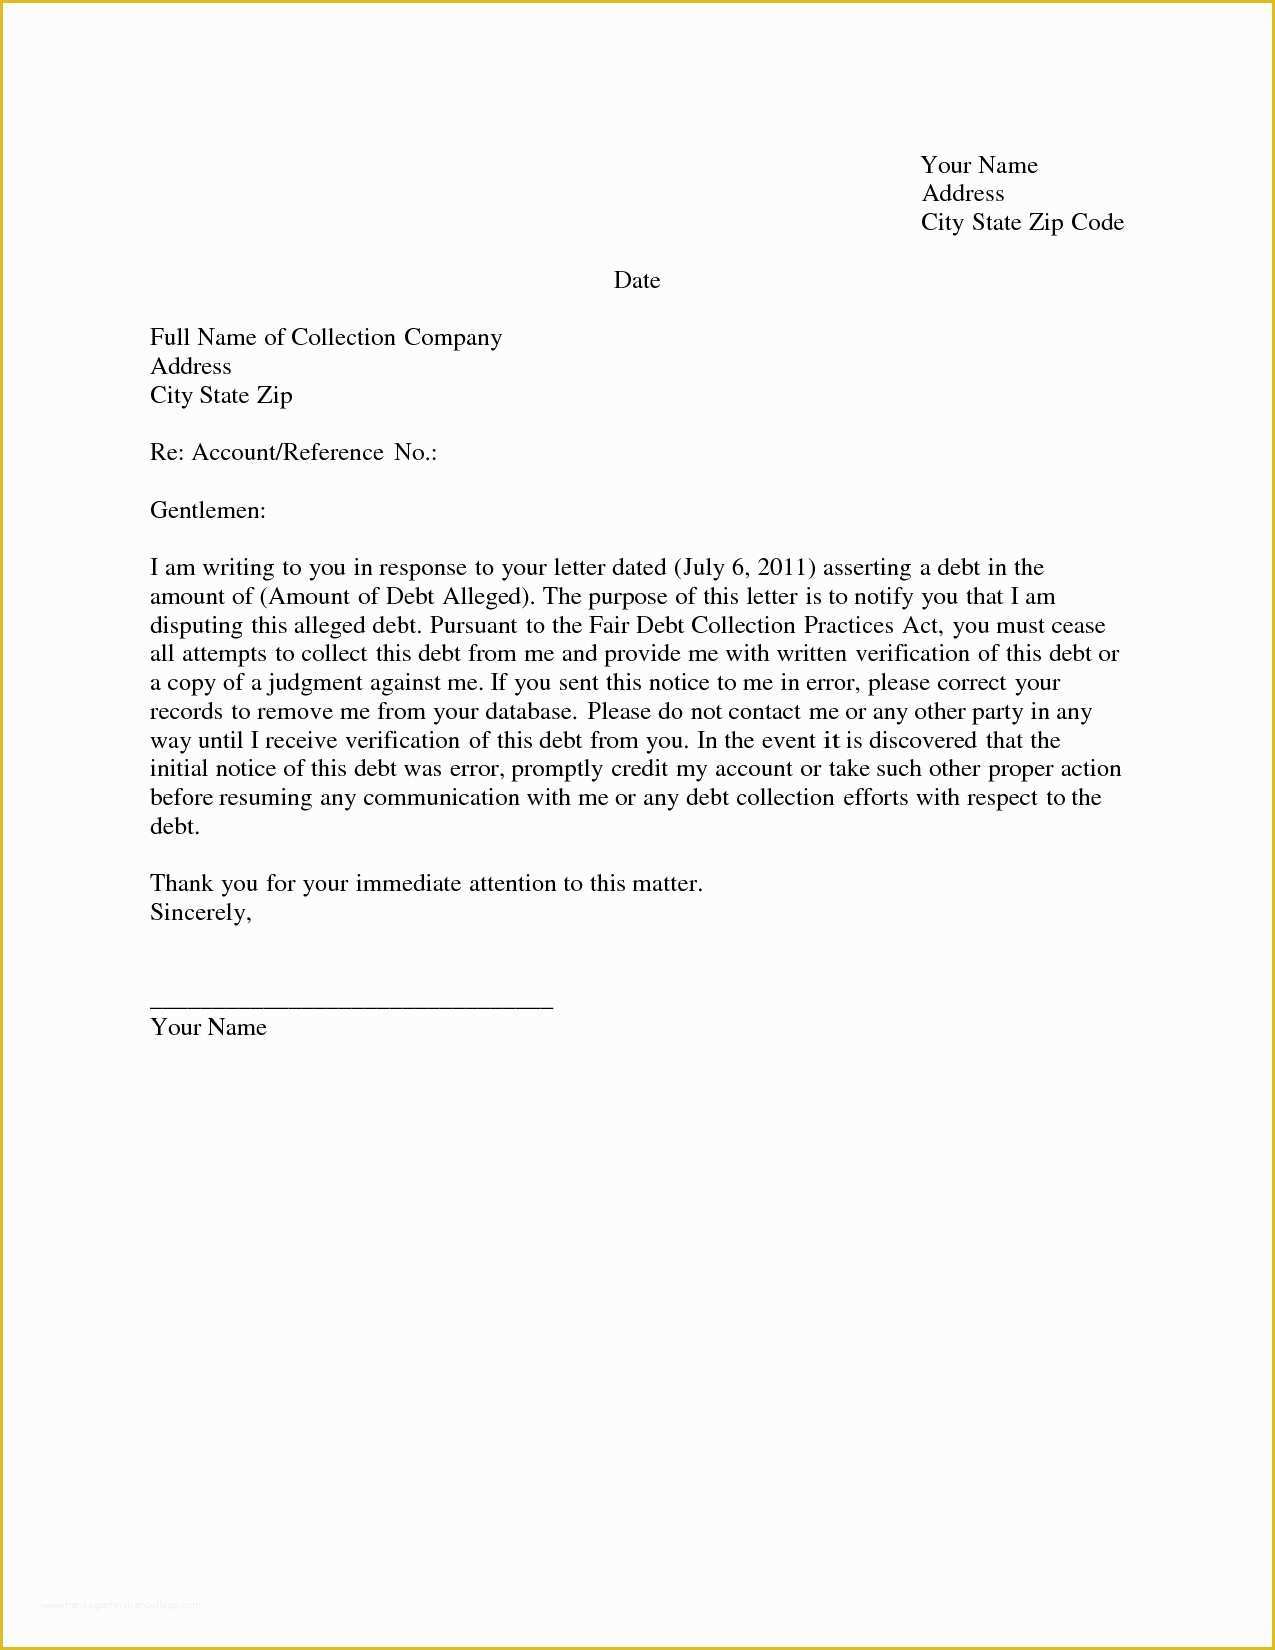 Free Section 609 Credit Dispute Letter Template Of 609 Dispute Letter to Credit Bureau Template Gallery